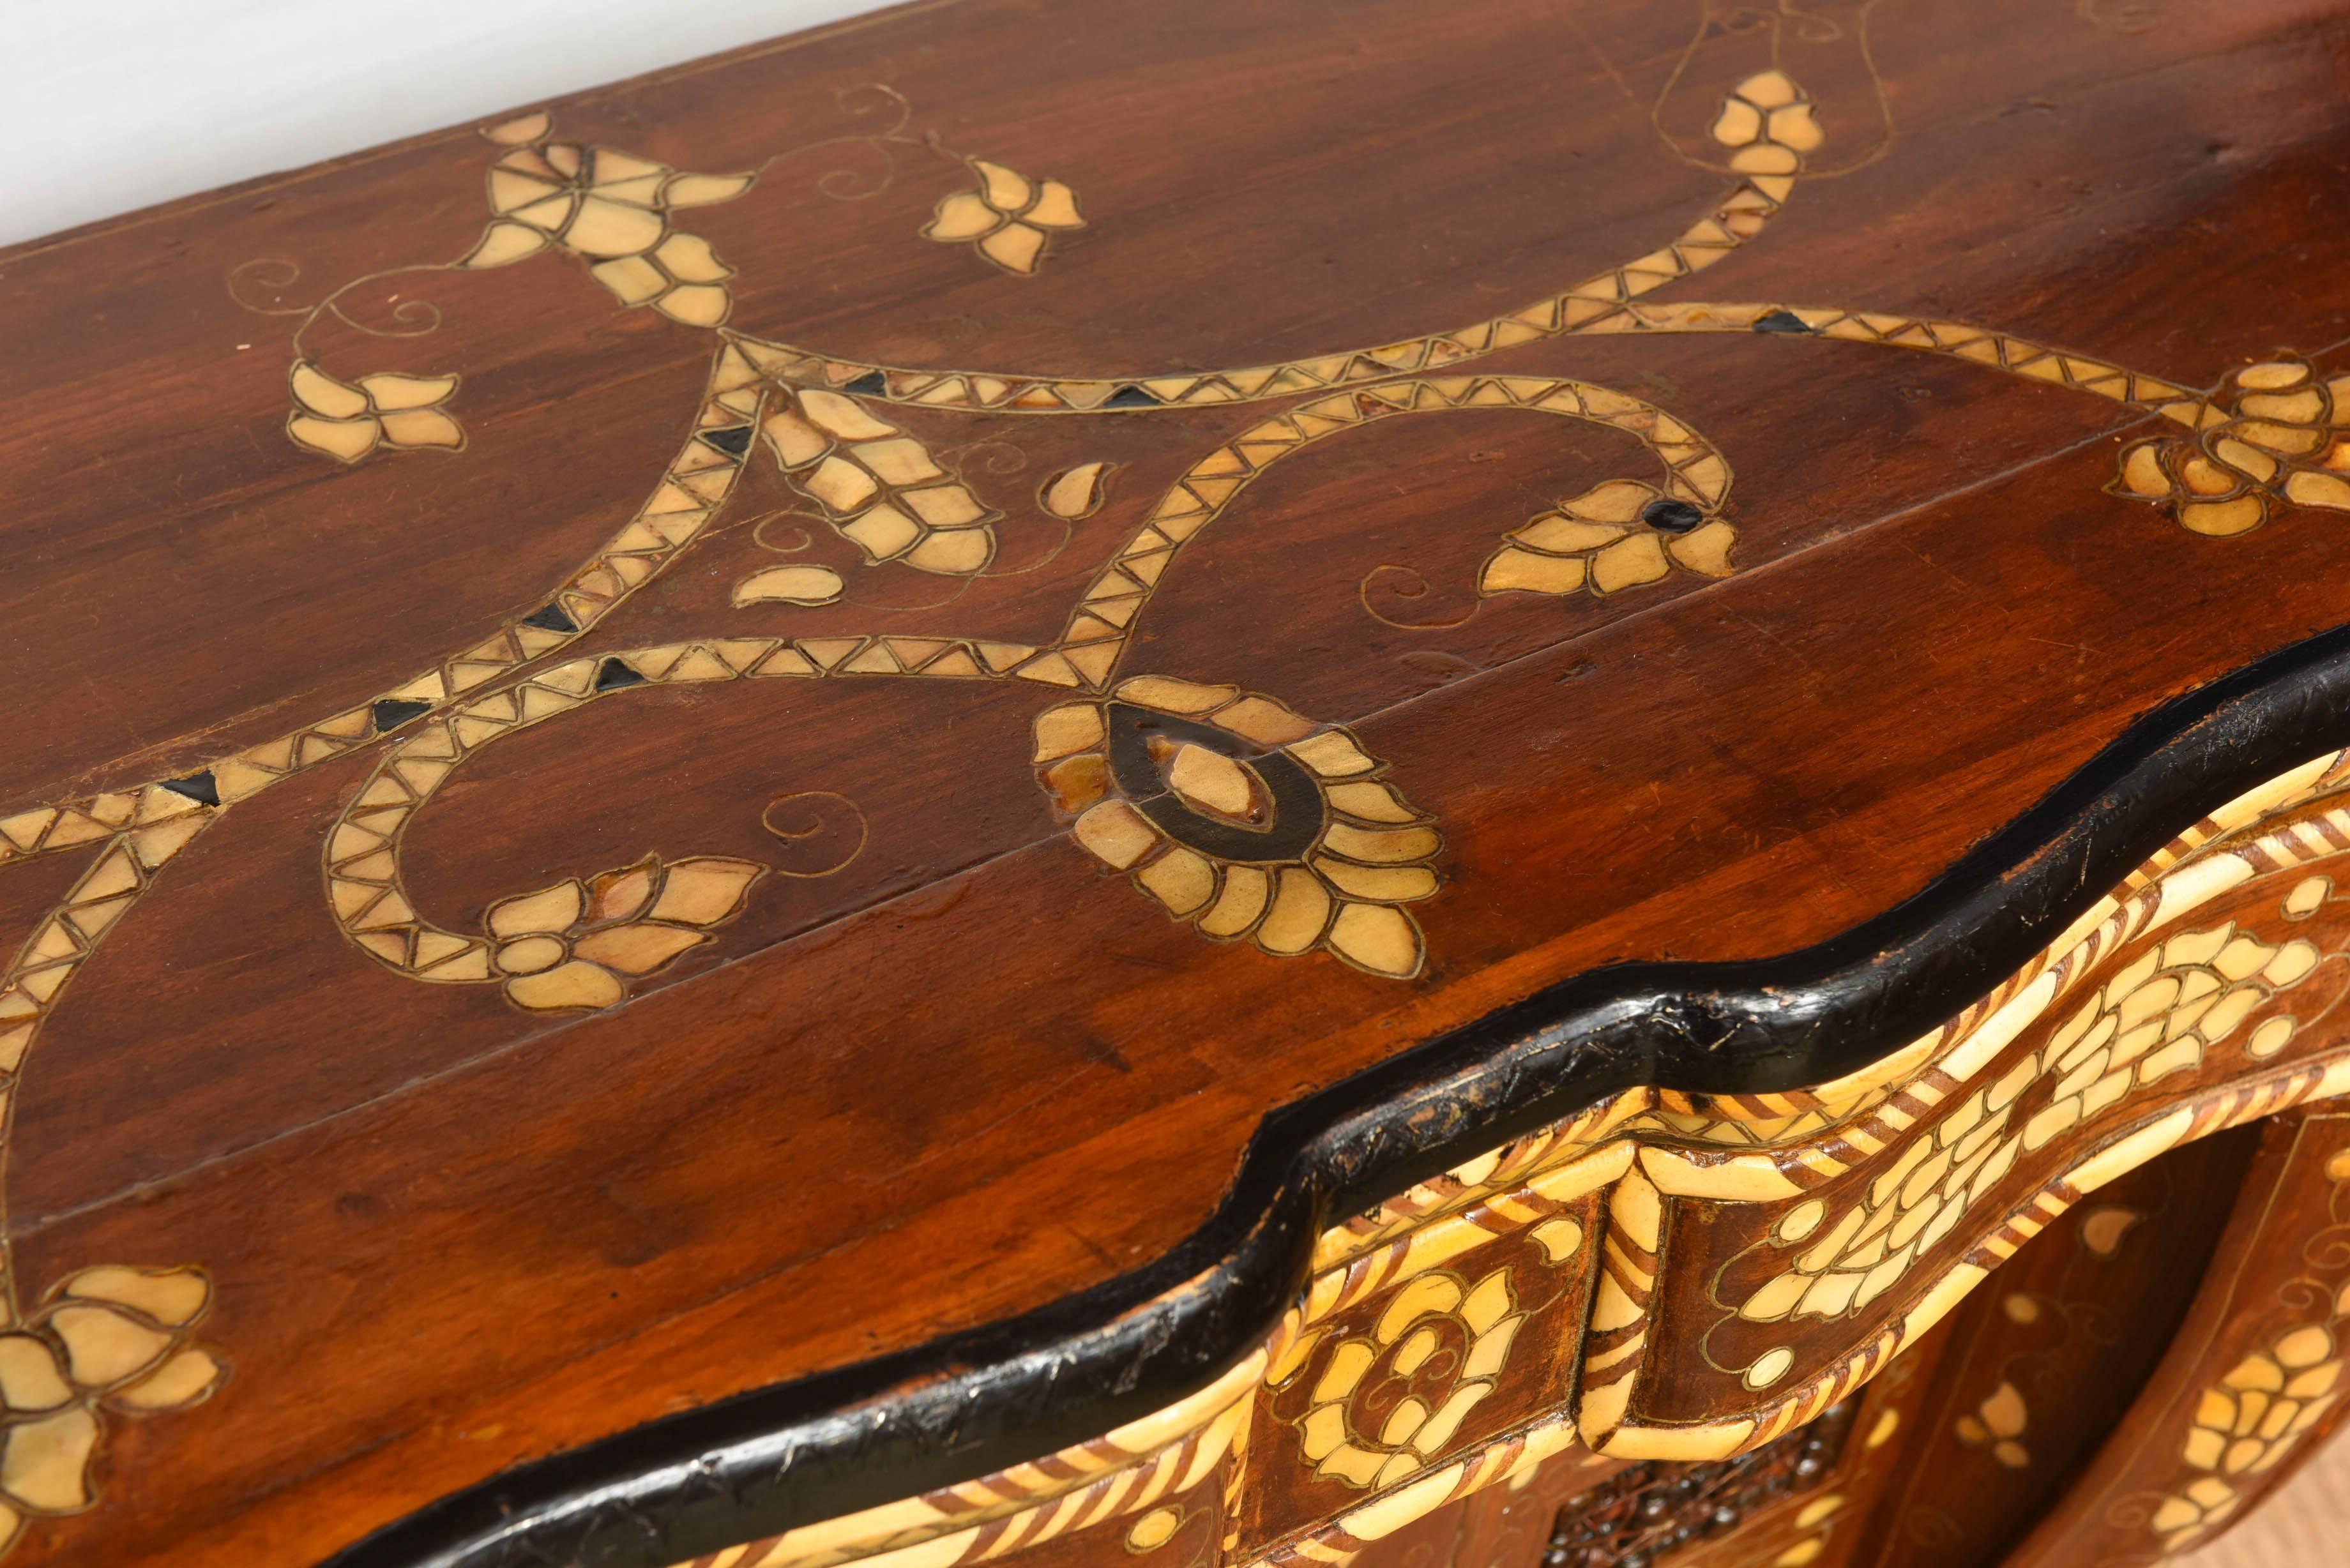 20th Century Syrian Mother-of Pearl-Inlaid Hardwood Console